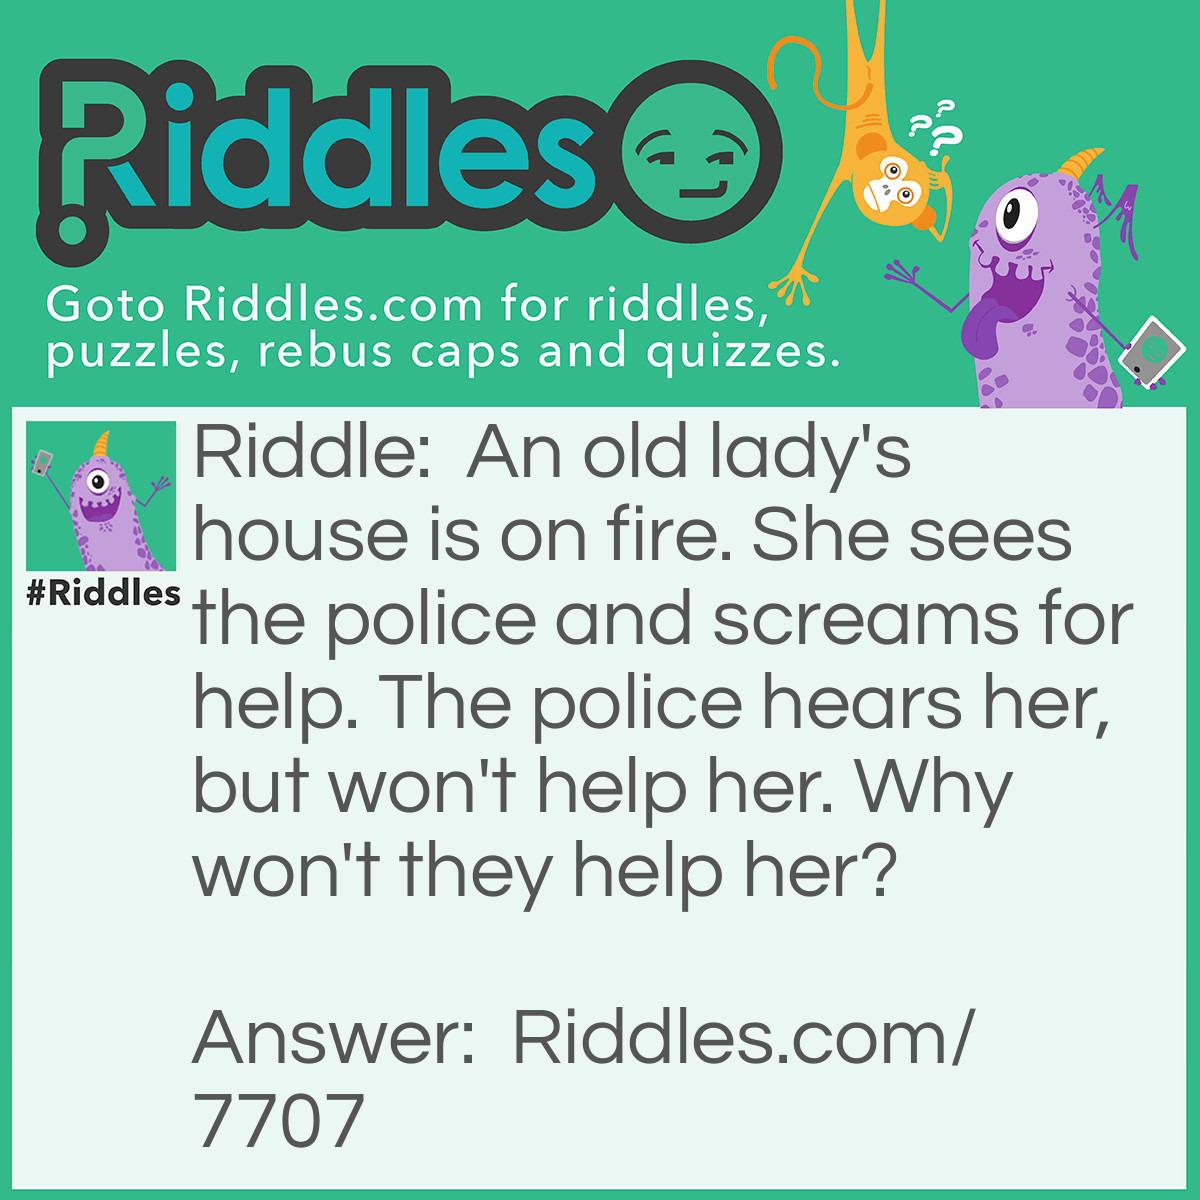 Riddle: An old lady's house is on fire. She sees the police and screams for help. The police hears her, but won't help her. Why won't they help her? Answer: Well DUH!!! It's the Firefighters job to help her. The police got nothing to do with that. -_-